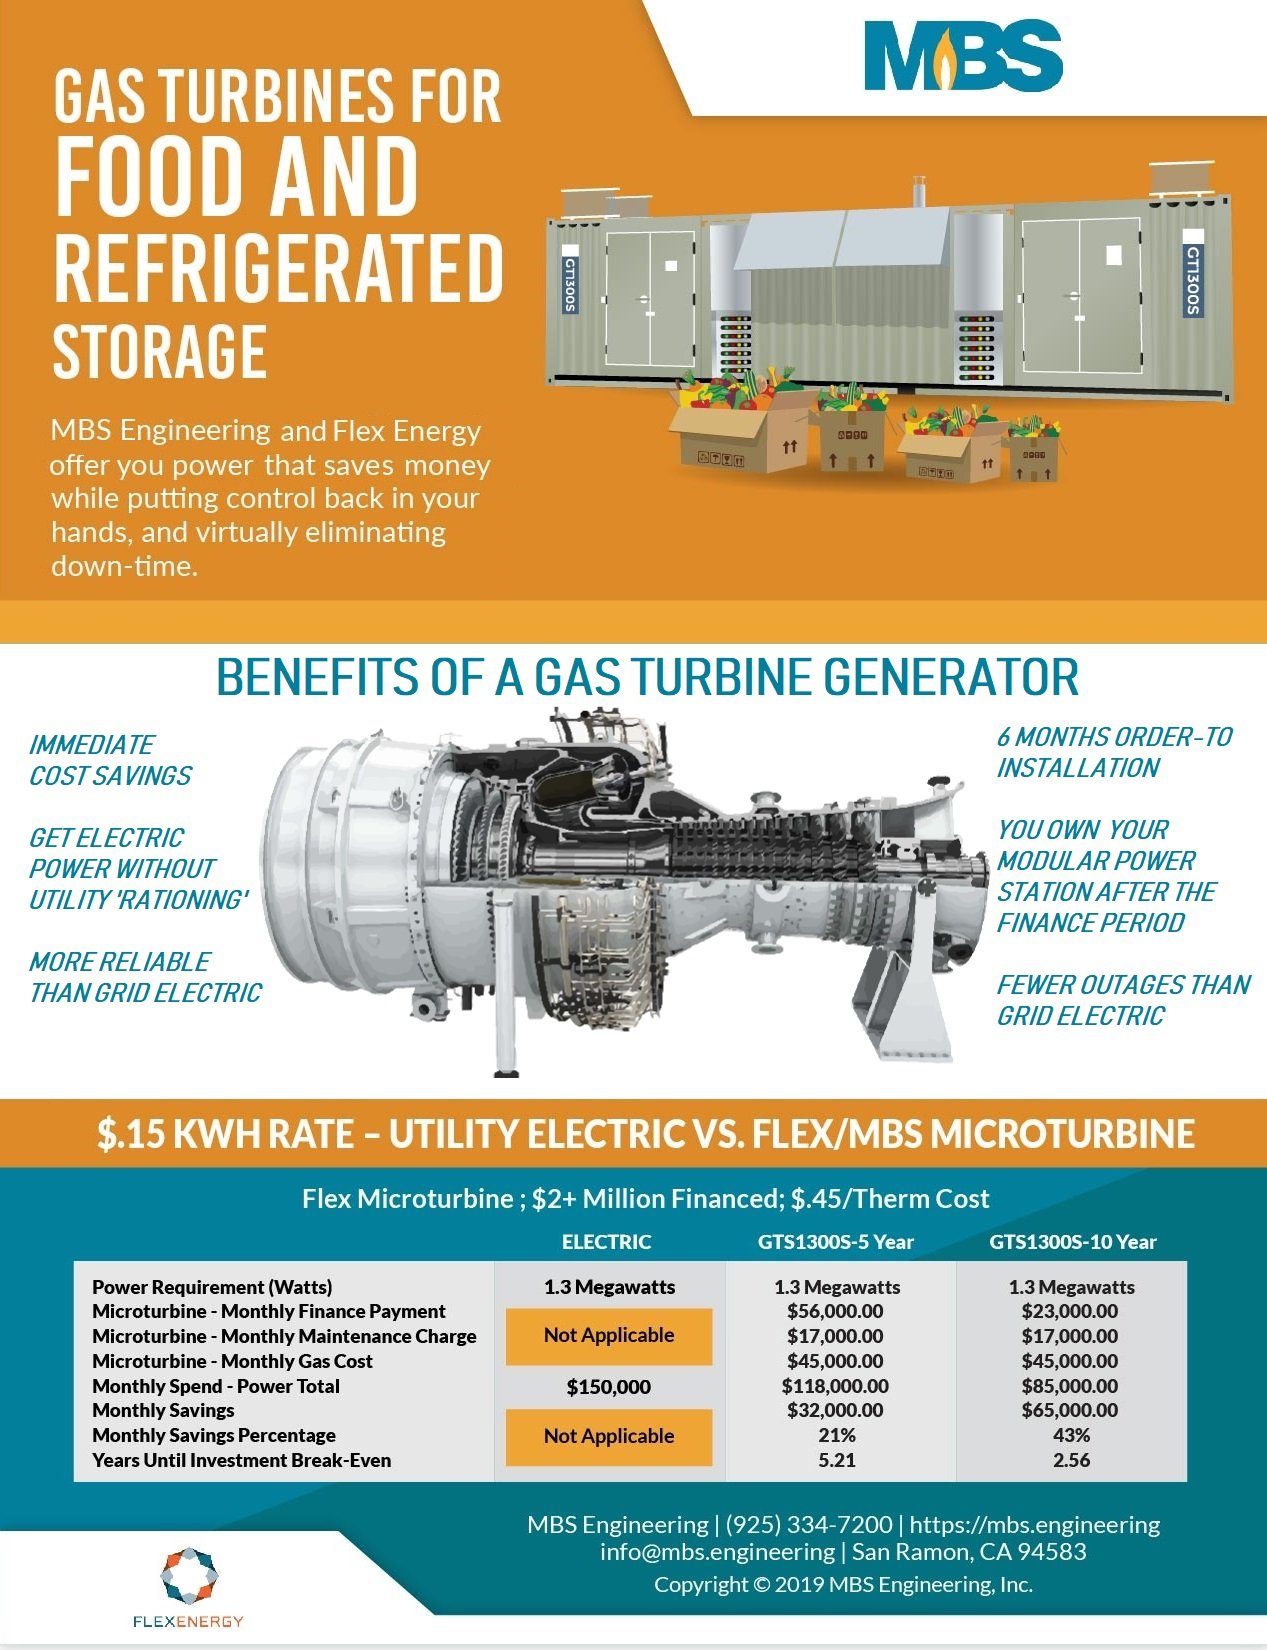 Gas turbines for food and refrigerated storage (1)